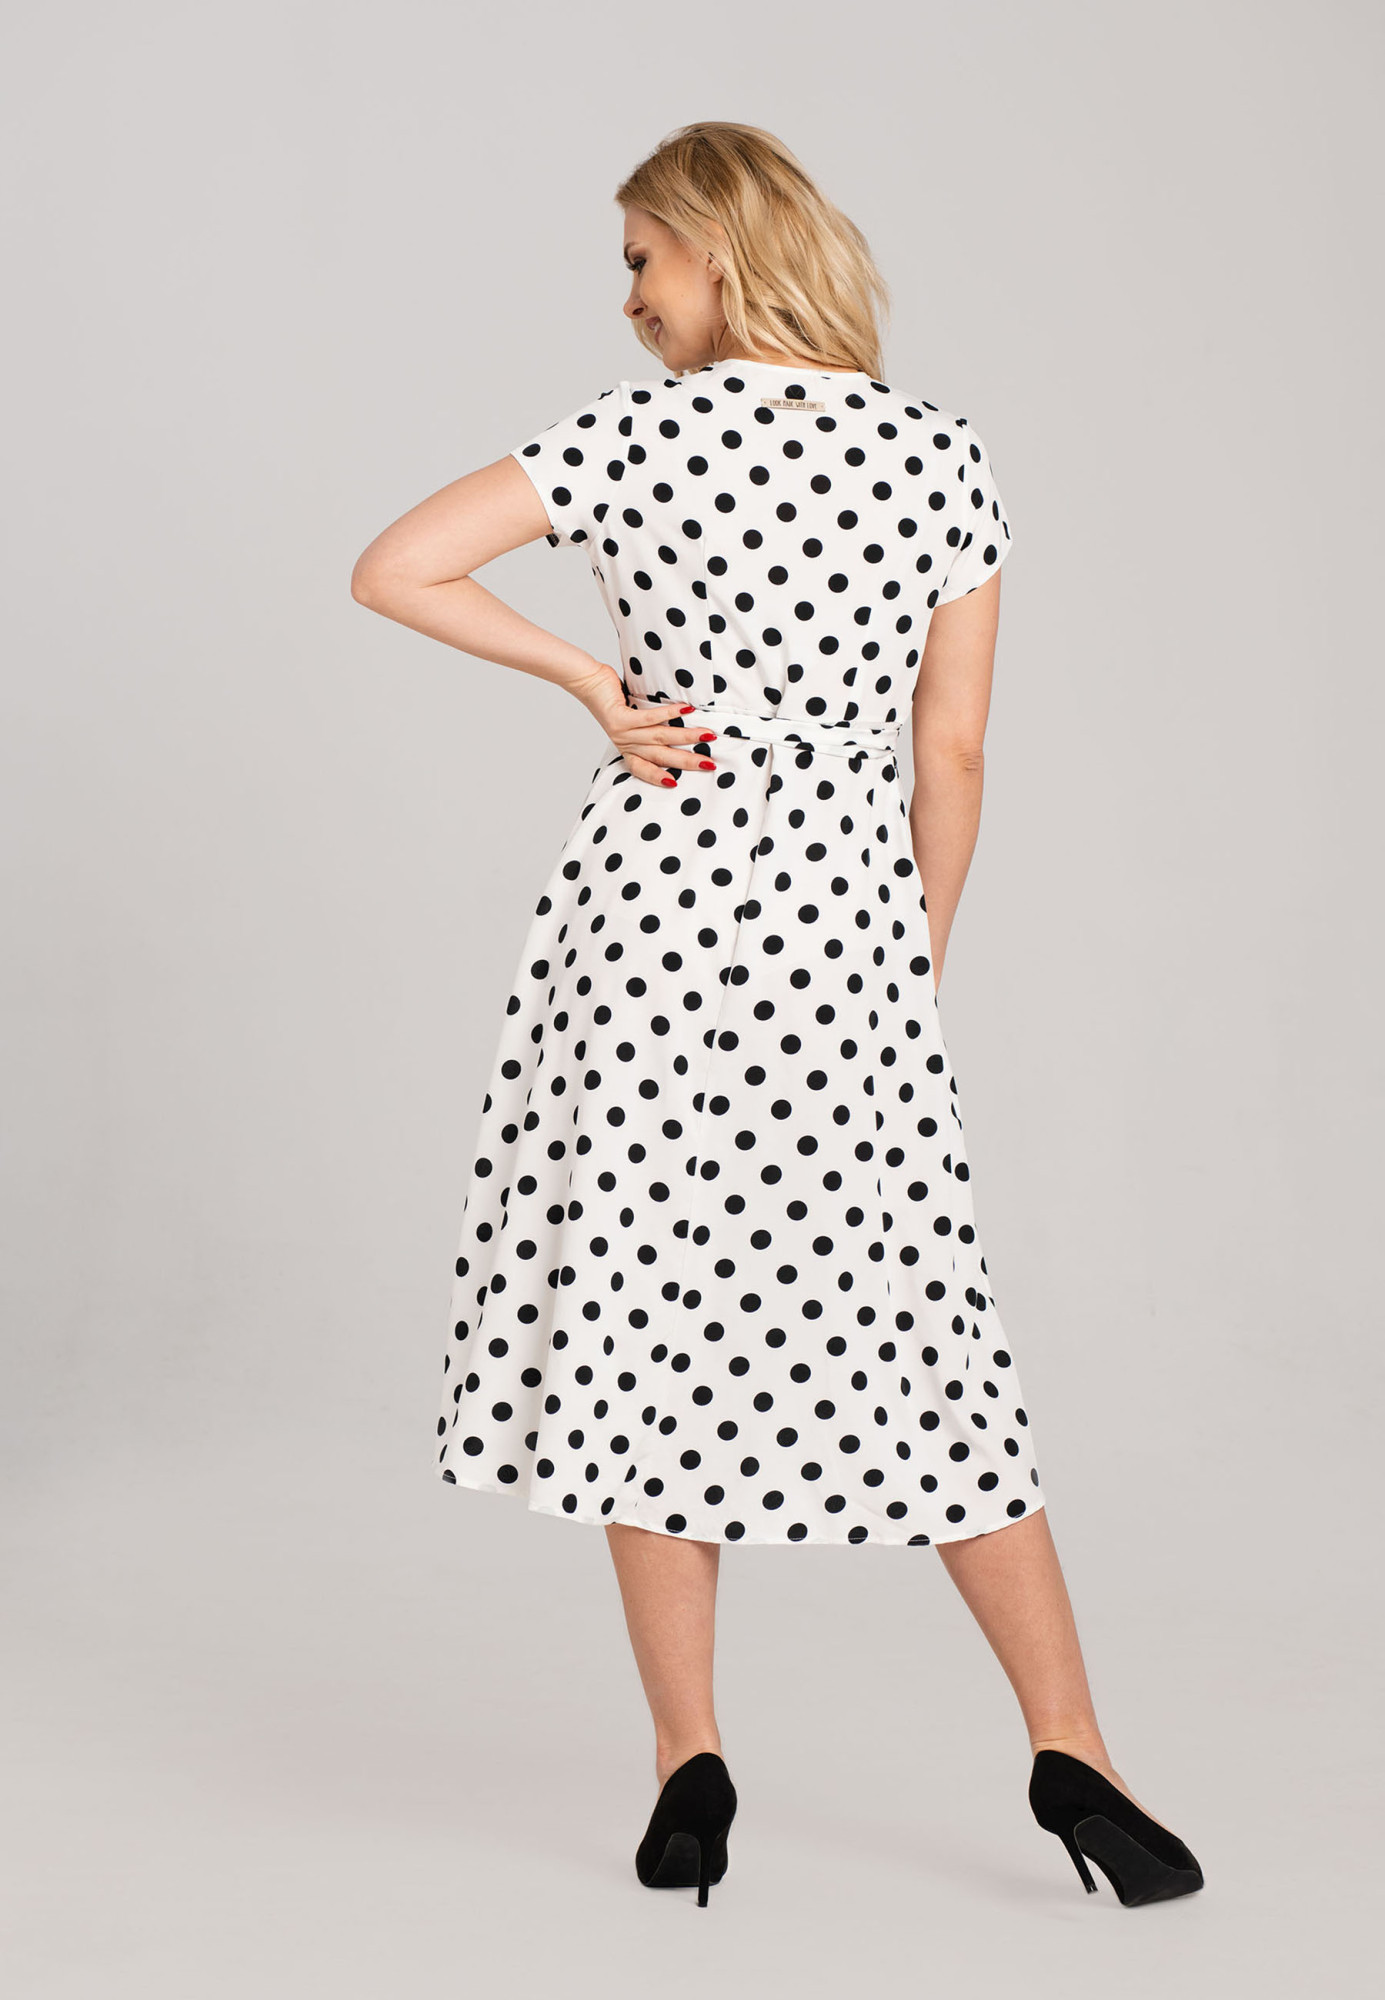 Look Made With Love Šaty N20 Polka Dots Black/White XL